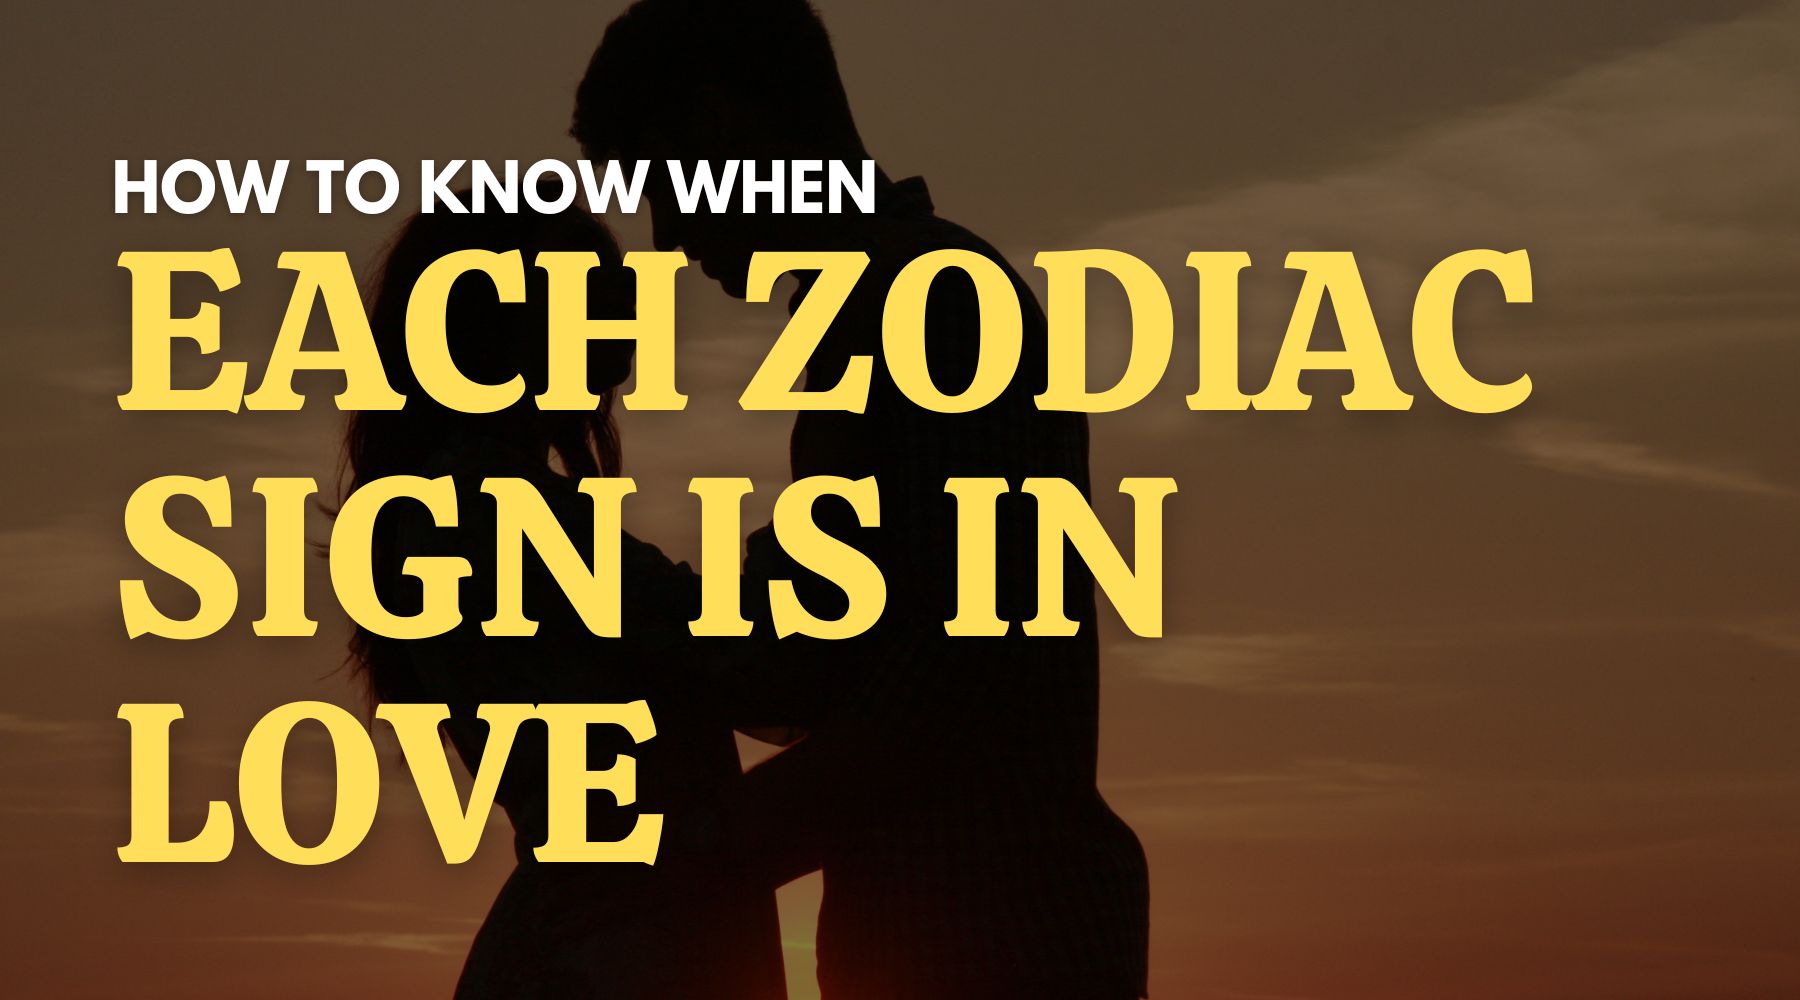 Decoding the Zodiac: How to Know When Each Zodiac Sign is in Love